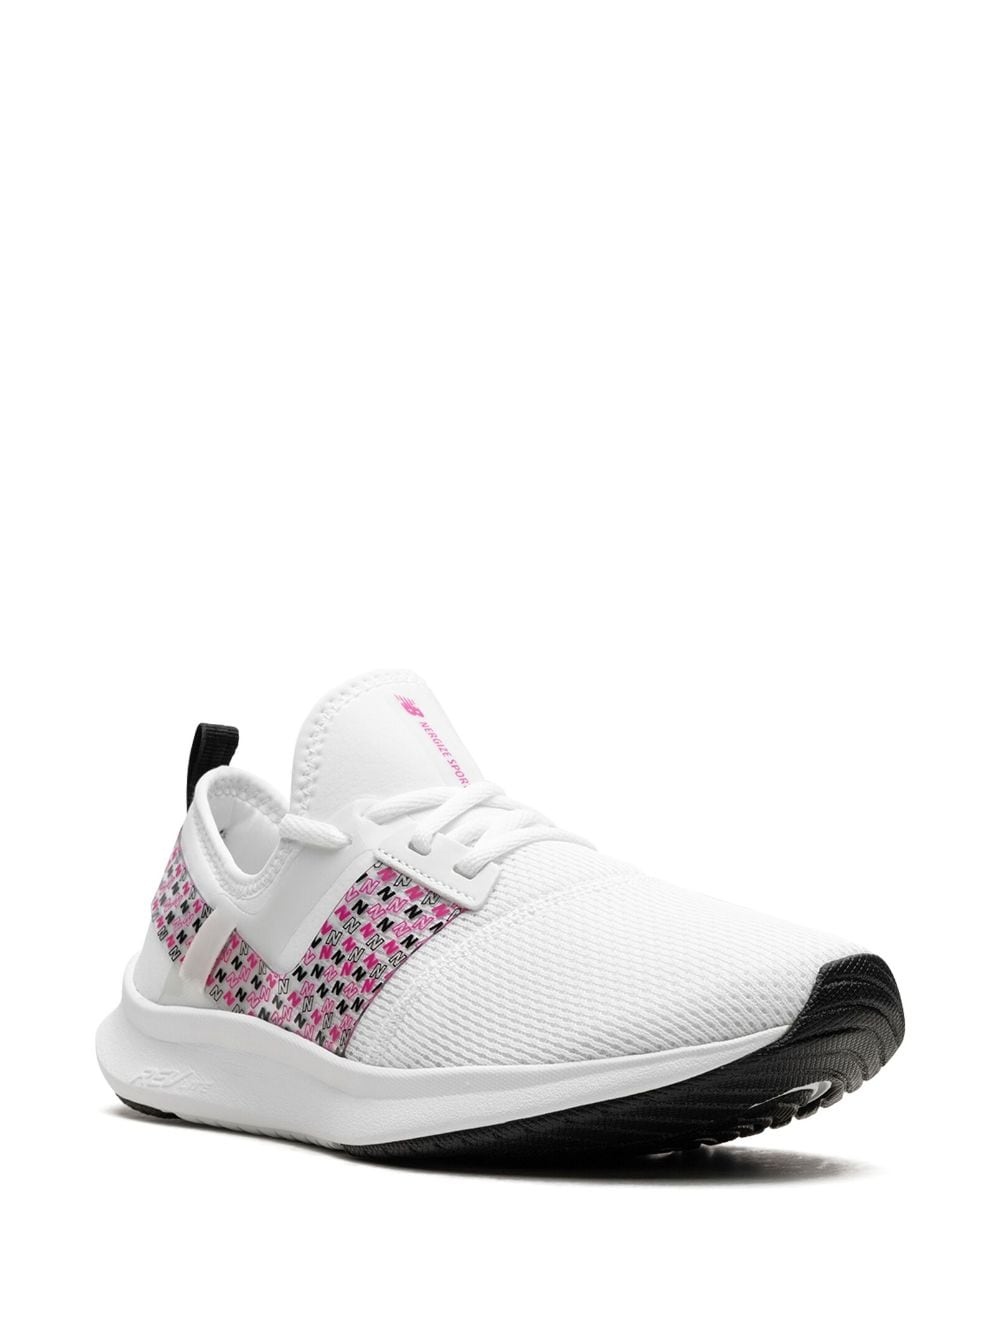 Nergize Sport "White/Pink" sneakers - 2